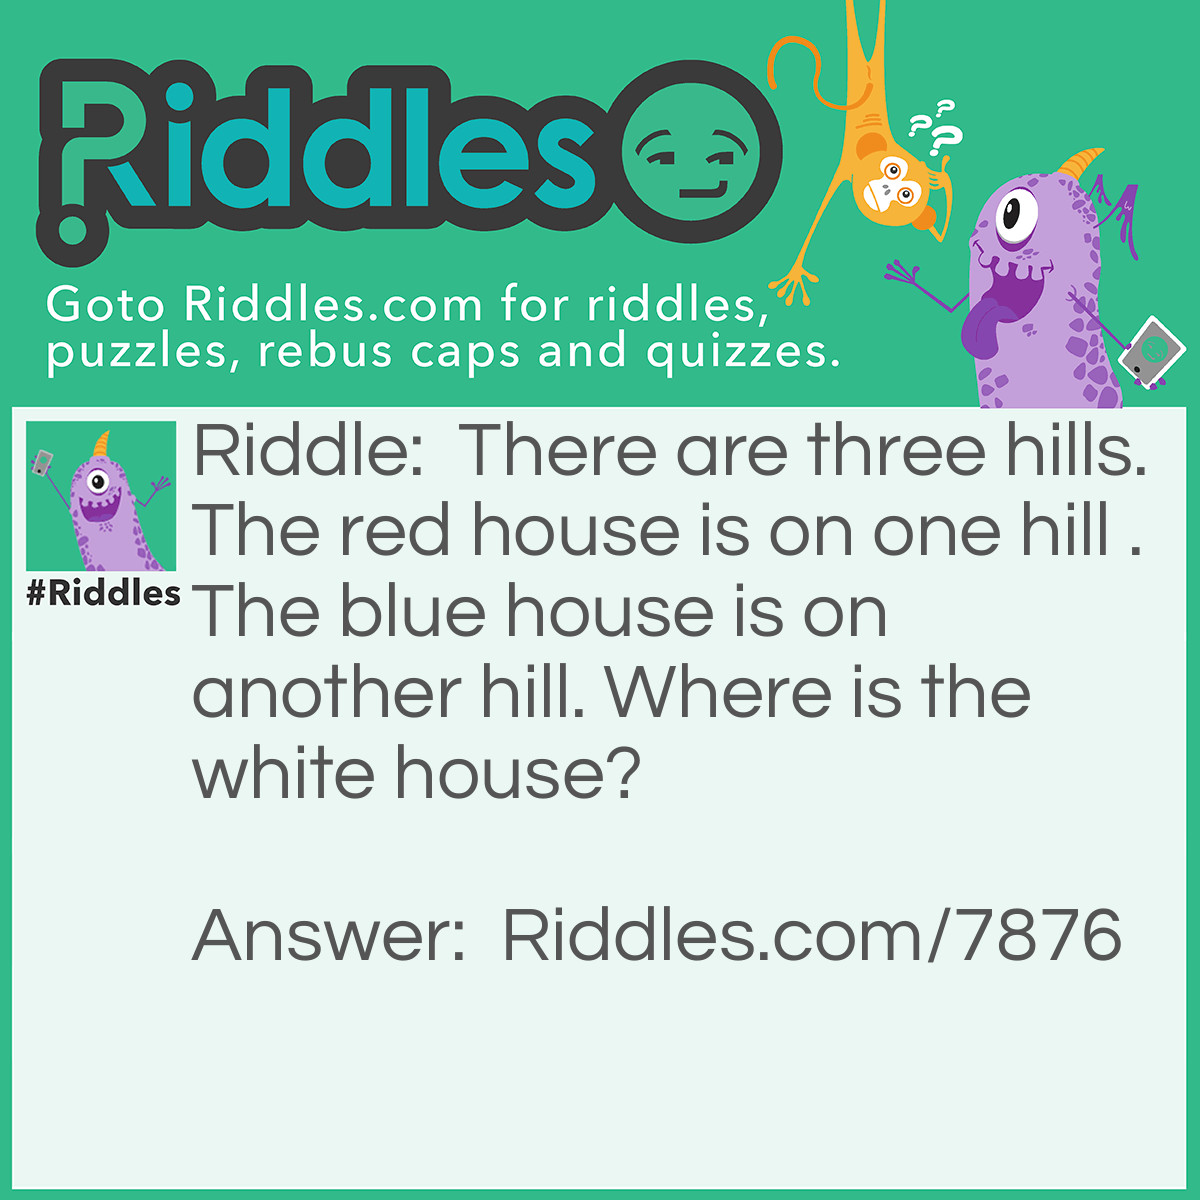 Riddle: There are three hills. The red house is on one hill . The blue house is on another hill. Where is the white house? Answer: In Washington, D.C.